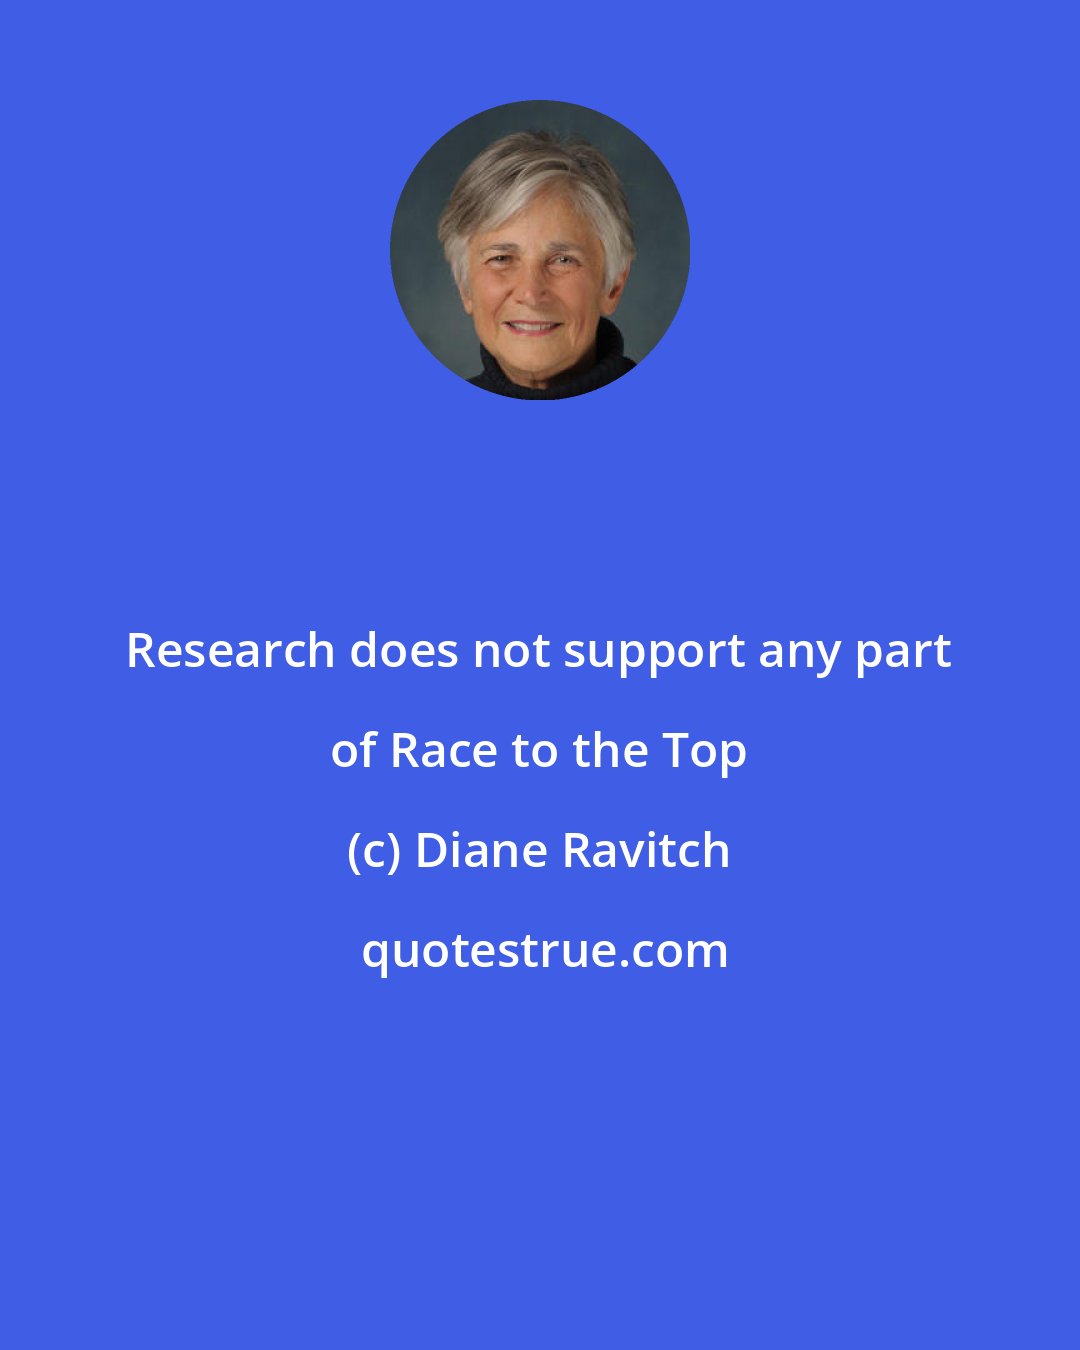 Diane Ravitch: Research does not support any part of Race to the Top